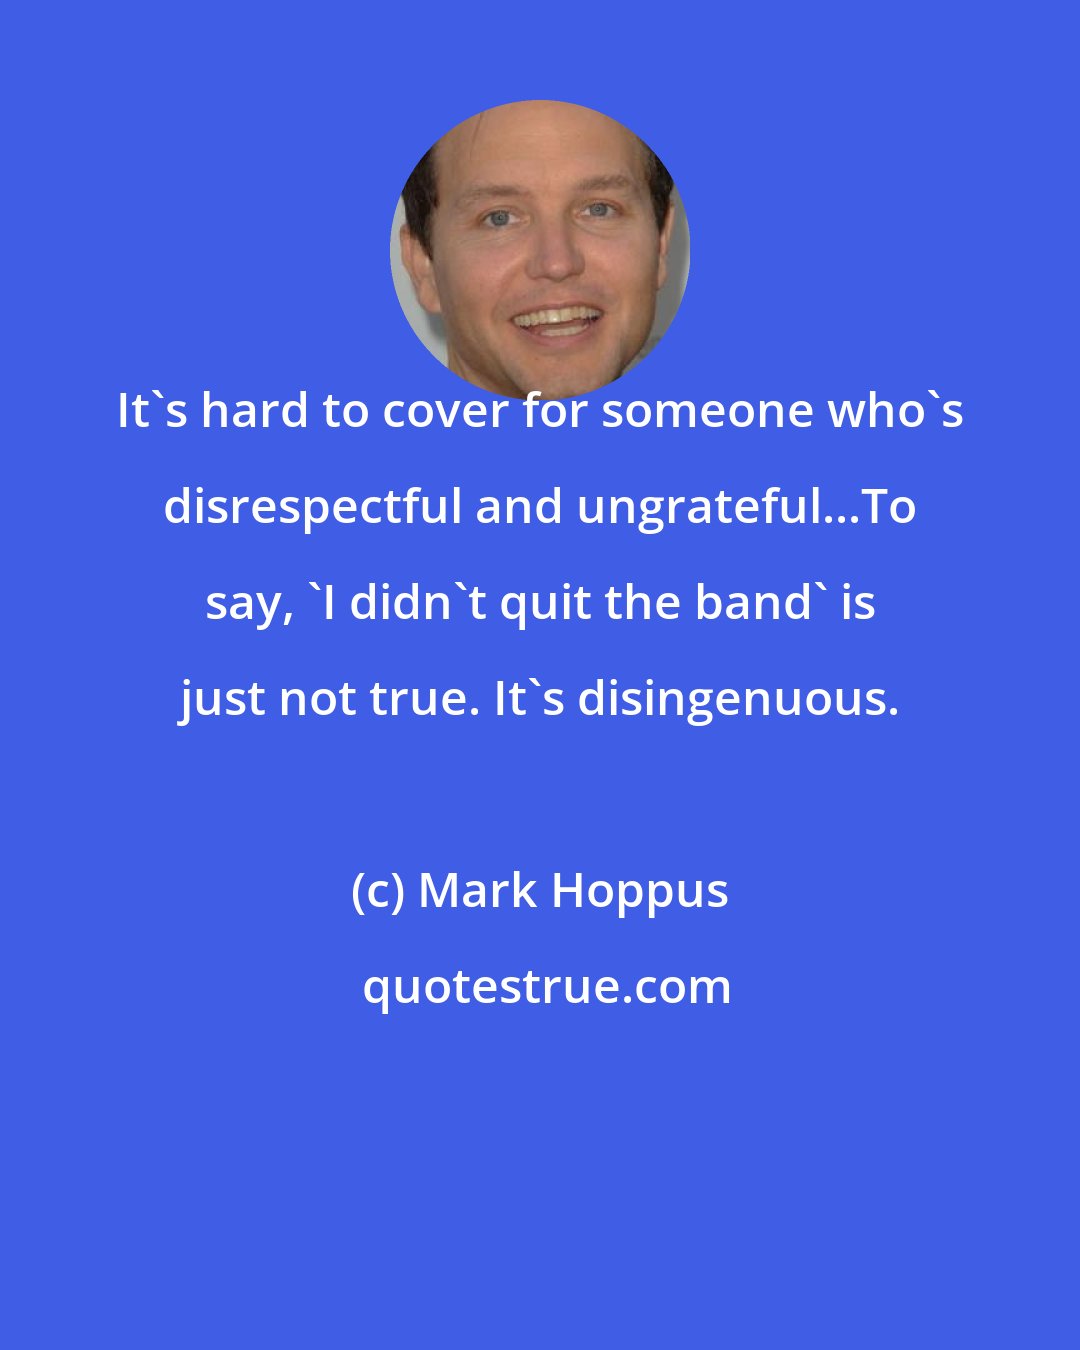 Mark Hoppus: It's hard to cover for someone who's disrespectful and ungrateful...To say, 'I didn't quit the band' is just not true. It's disingenuous.